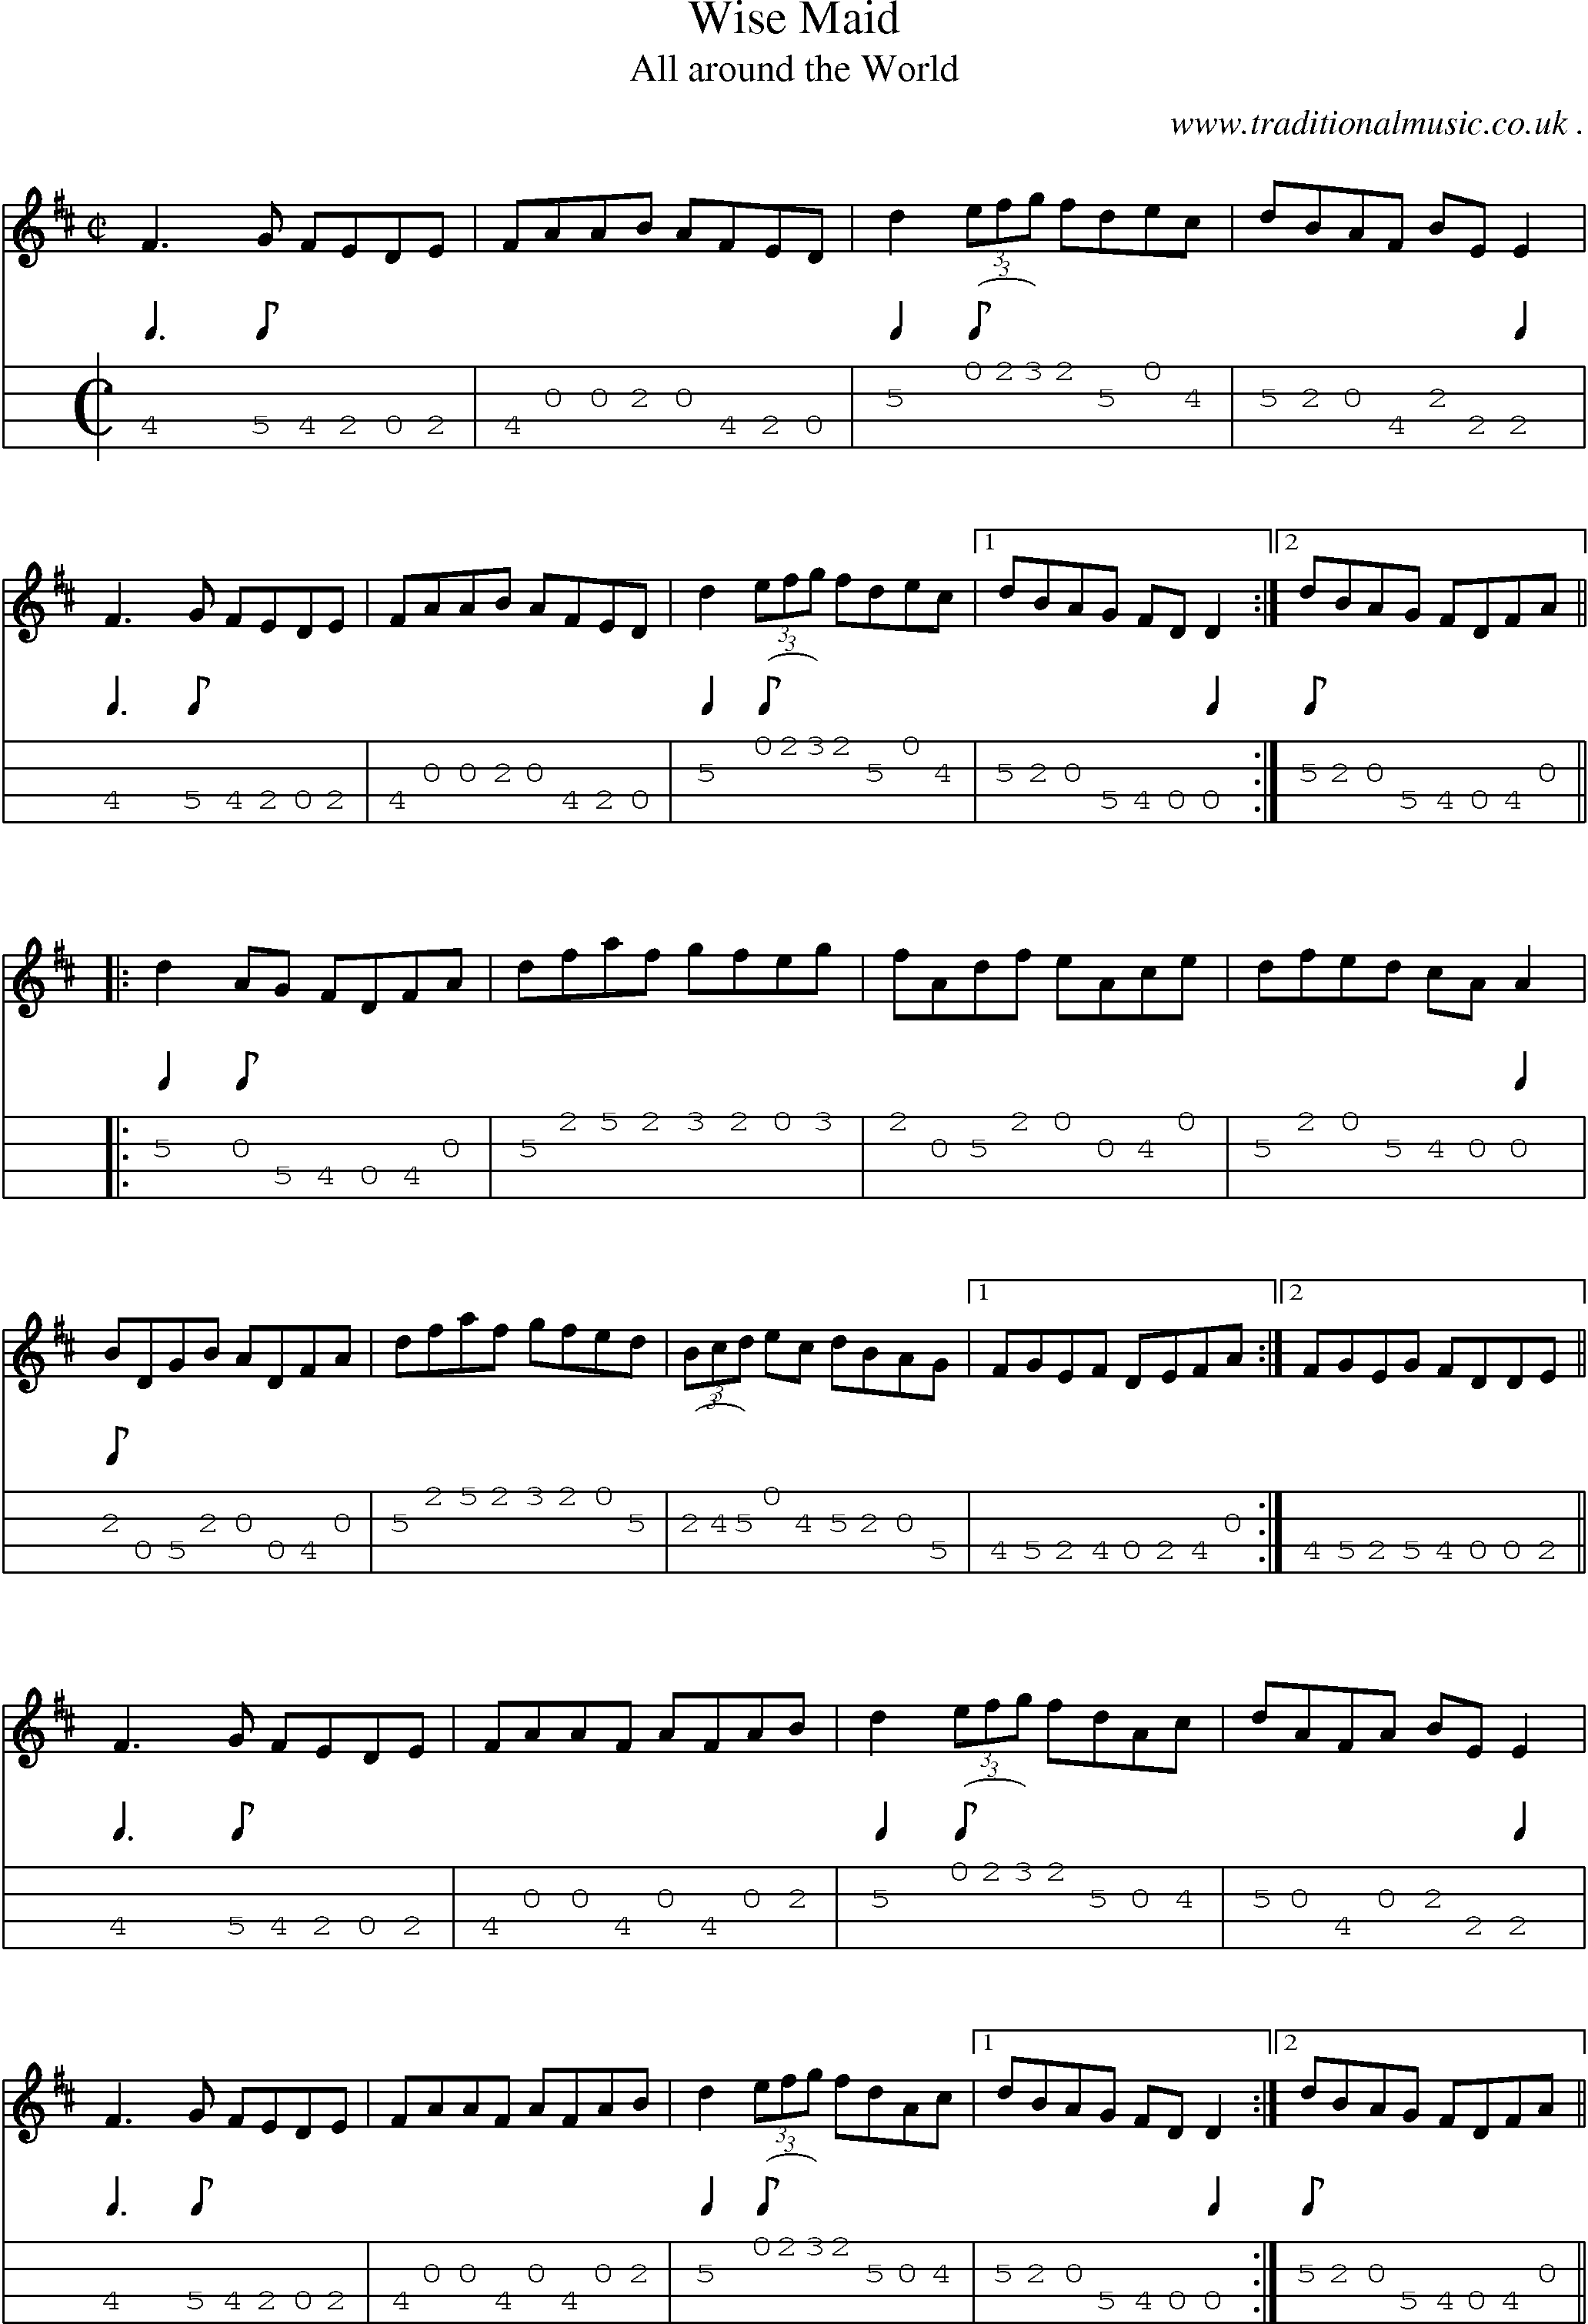 Sheet-Music and Mandolin Tabs for Wise Maid